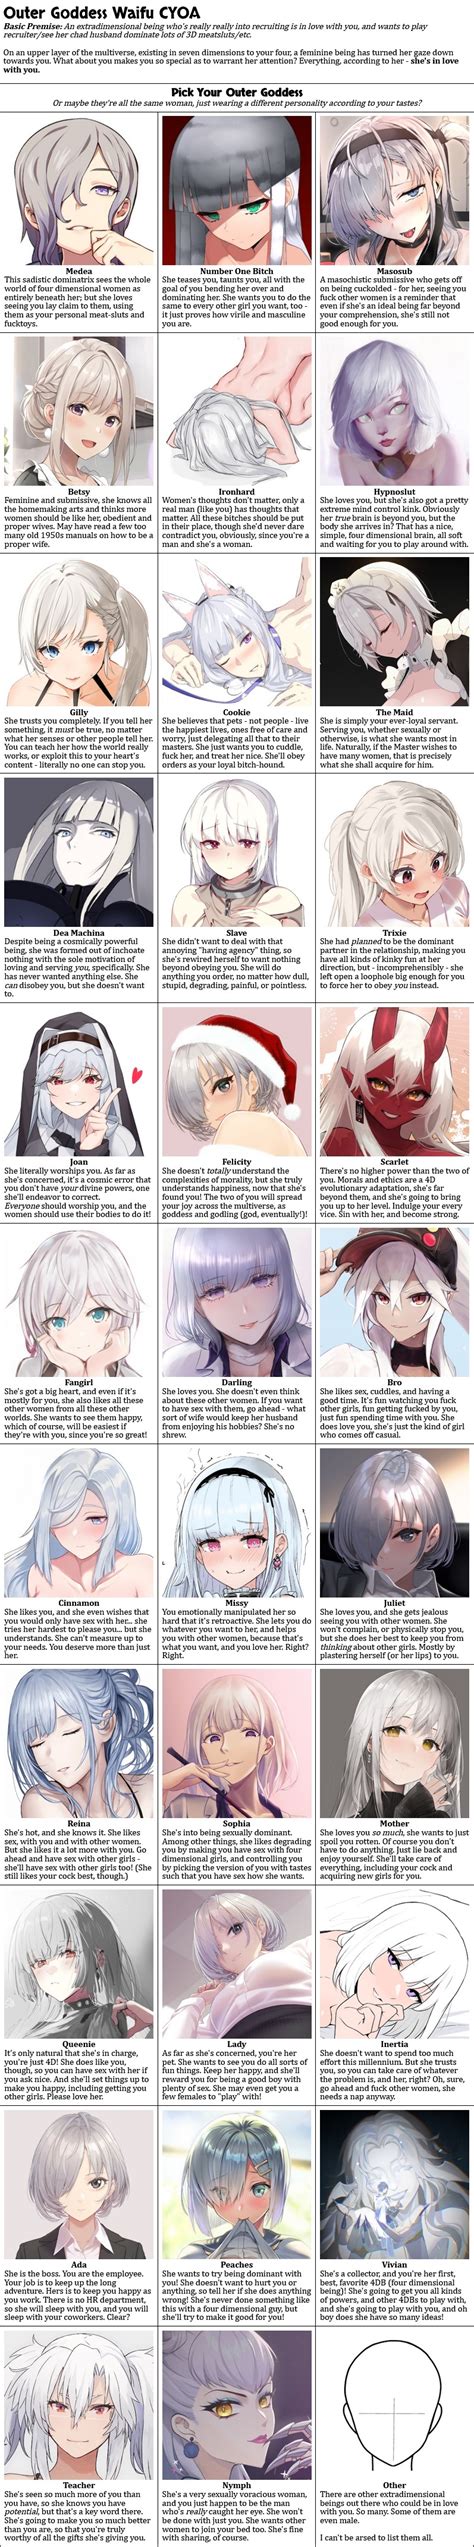 Outer Goddess Waifu Cyoa Image Chest Free Image Hosting And Sharing Made Easy